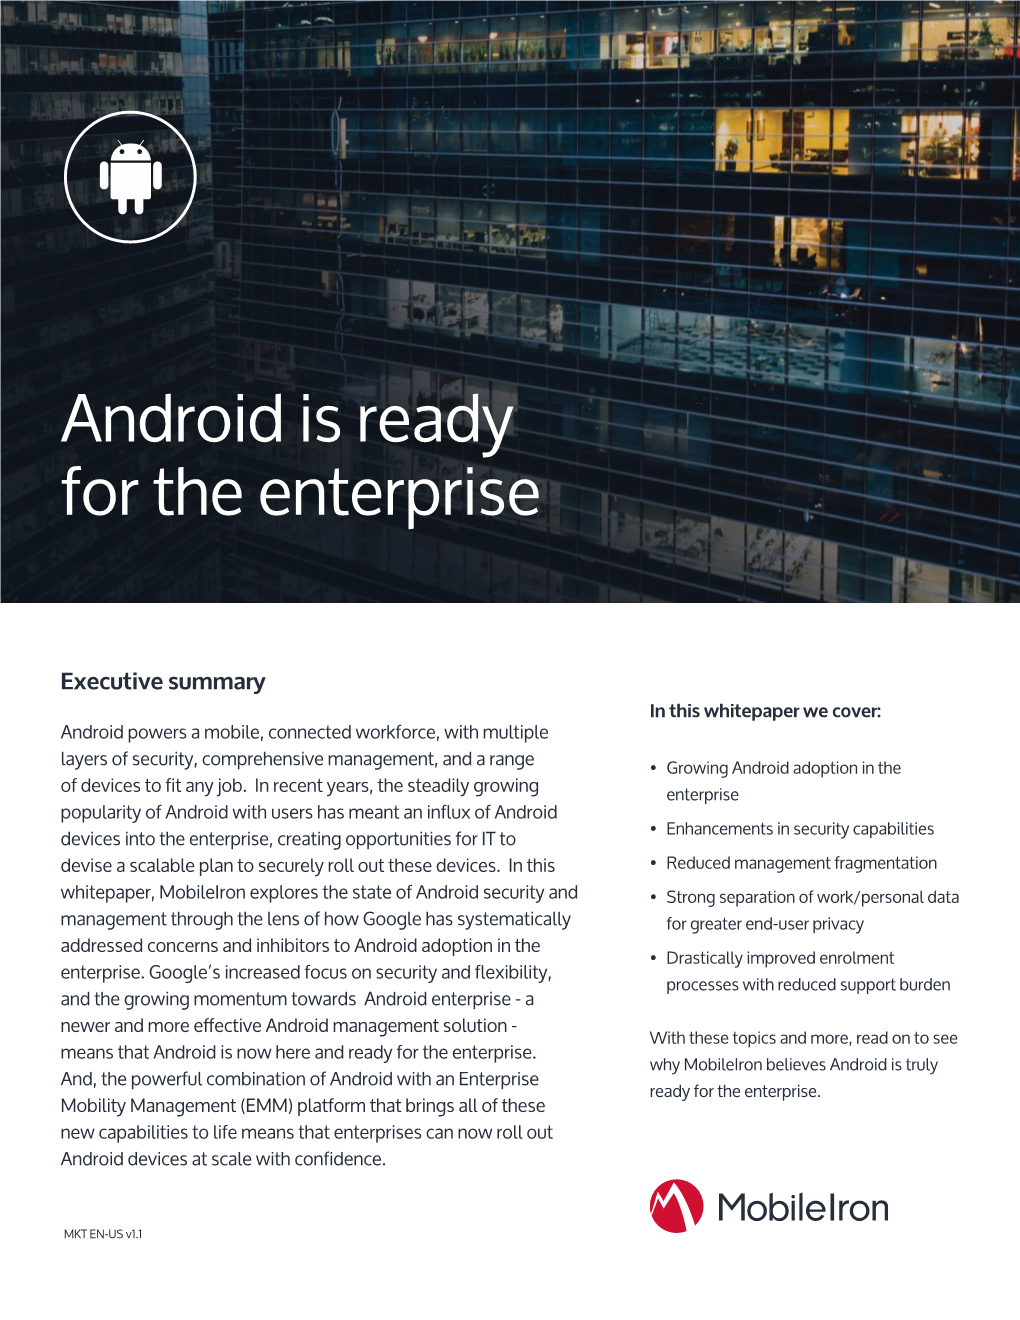 Android Is Ready for the Enterprise